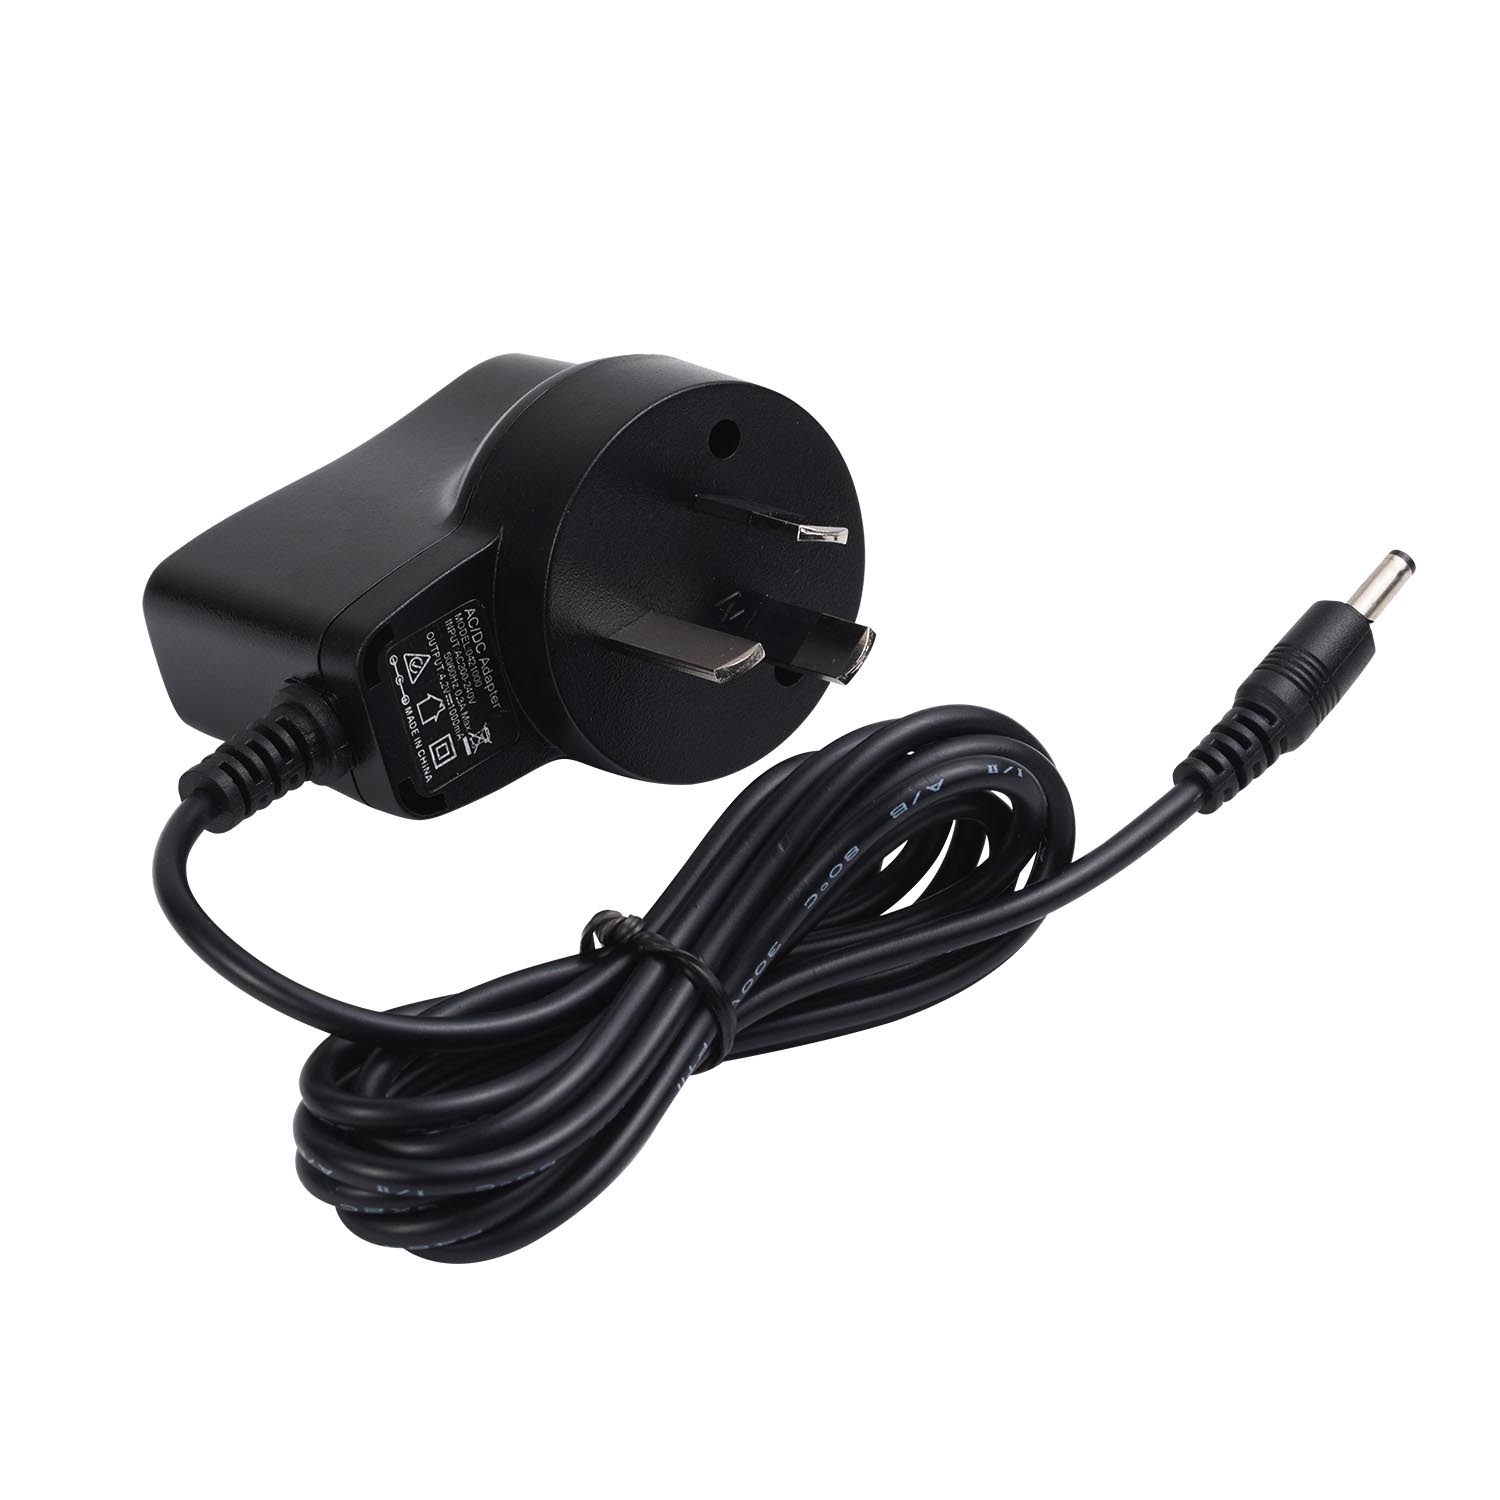 Reasonable price 5v 1a Charger - 4.2V 1A battery charger adapter – Huyssen